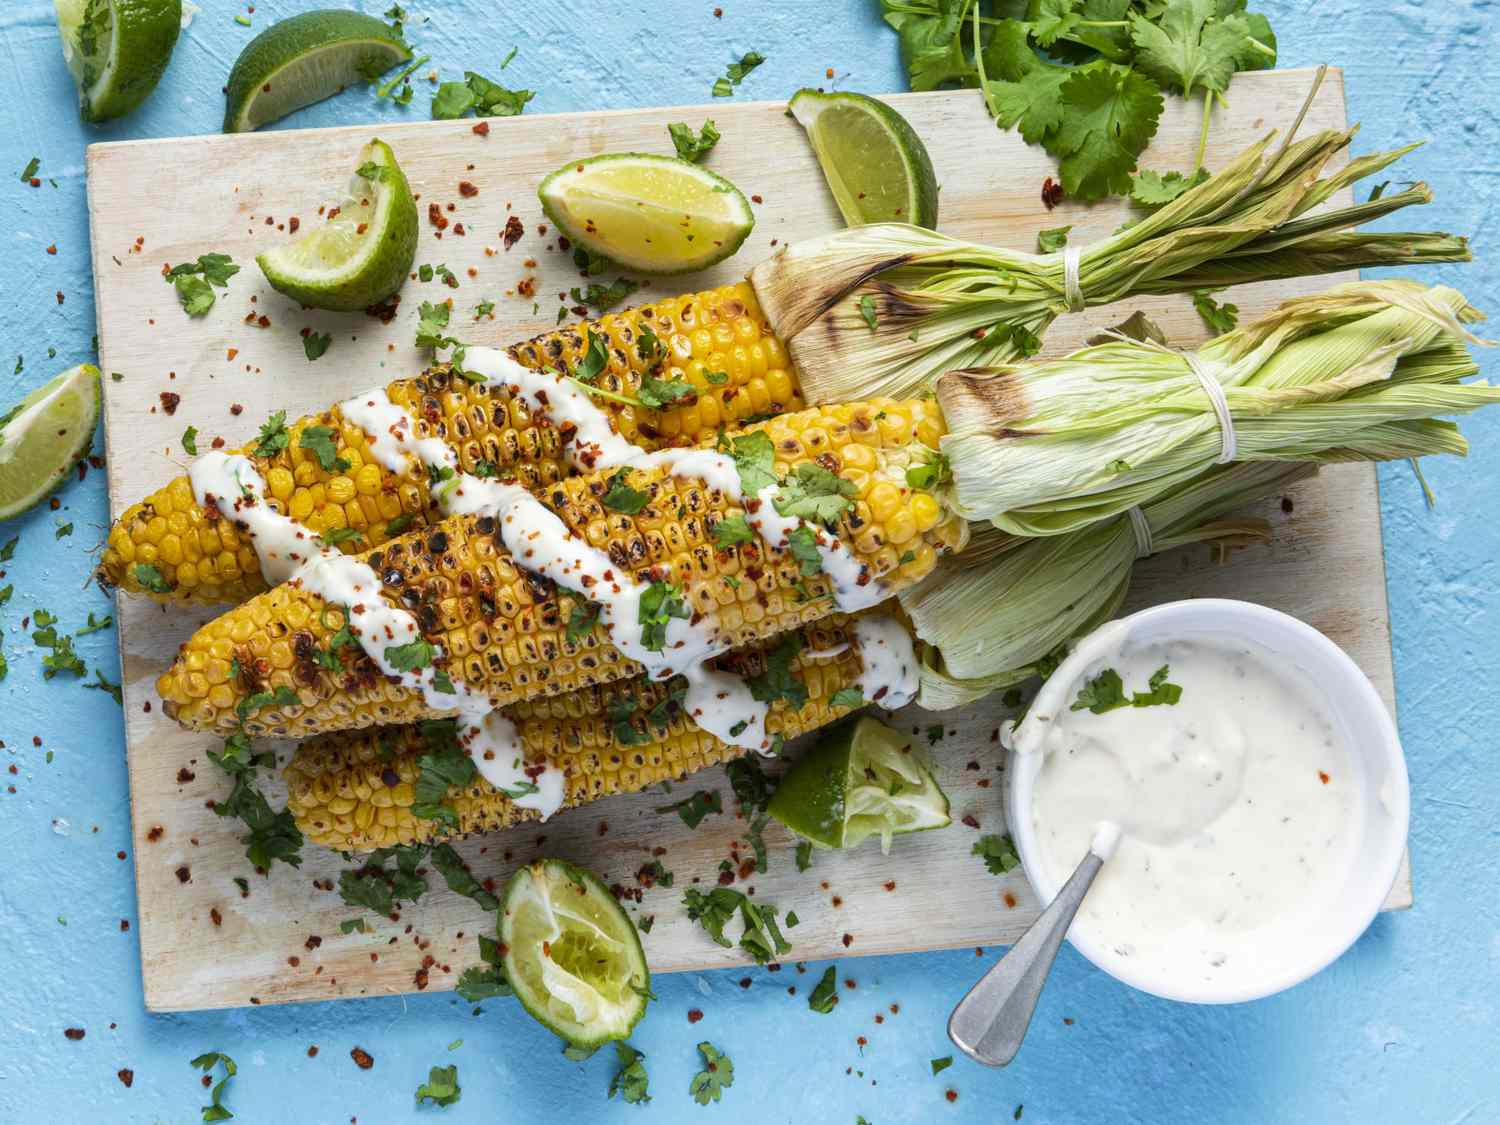 Grilled BBQ Corn Cob with Herbs, Lime and Garlic Sauce. Mexican Street Food or Summer Garden Party Snack